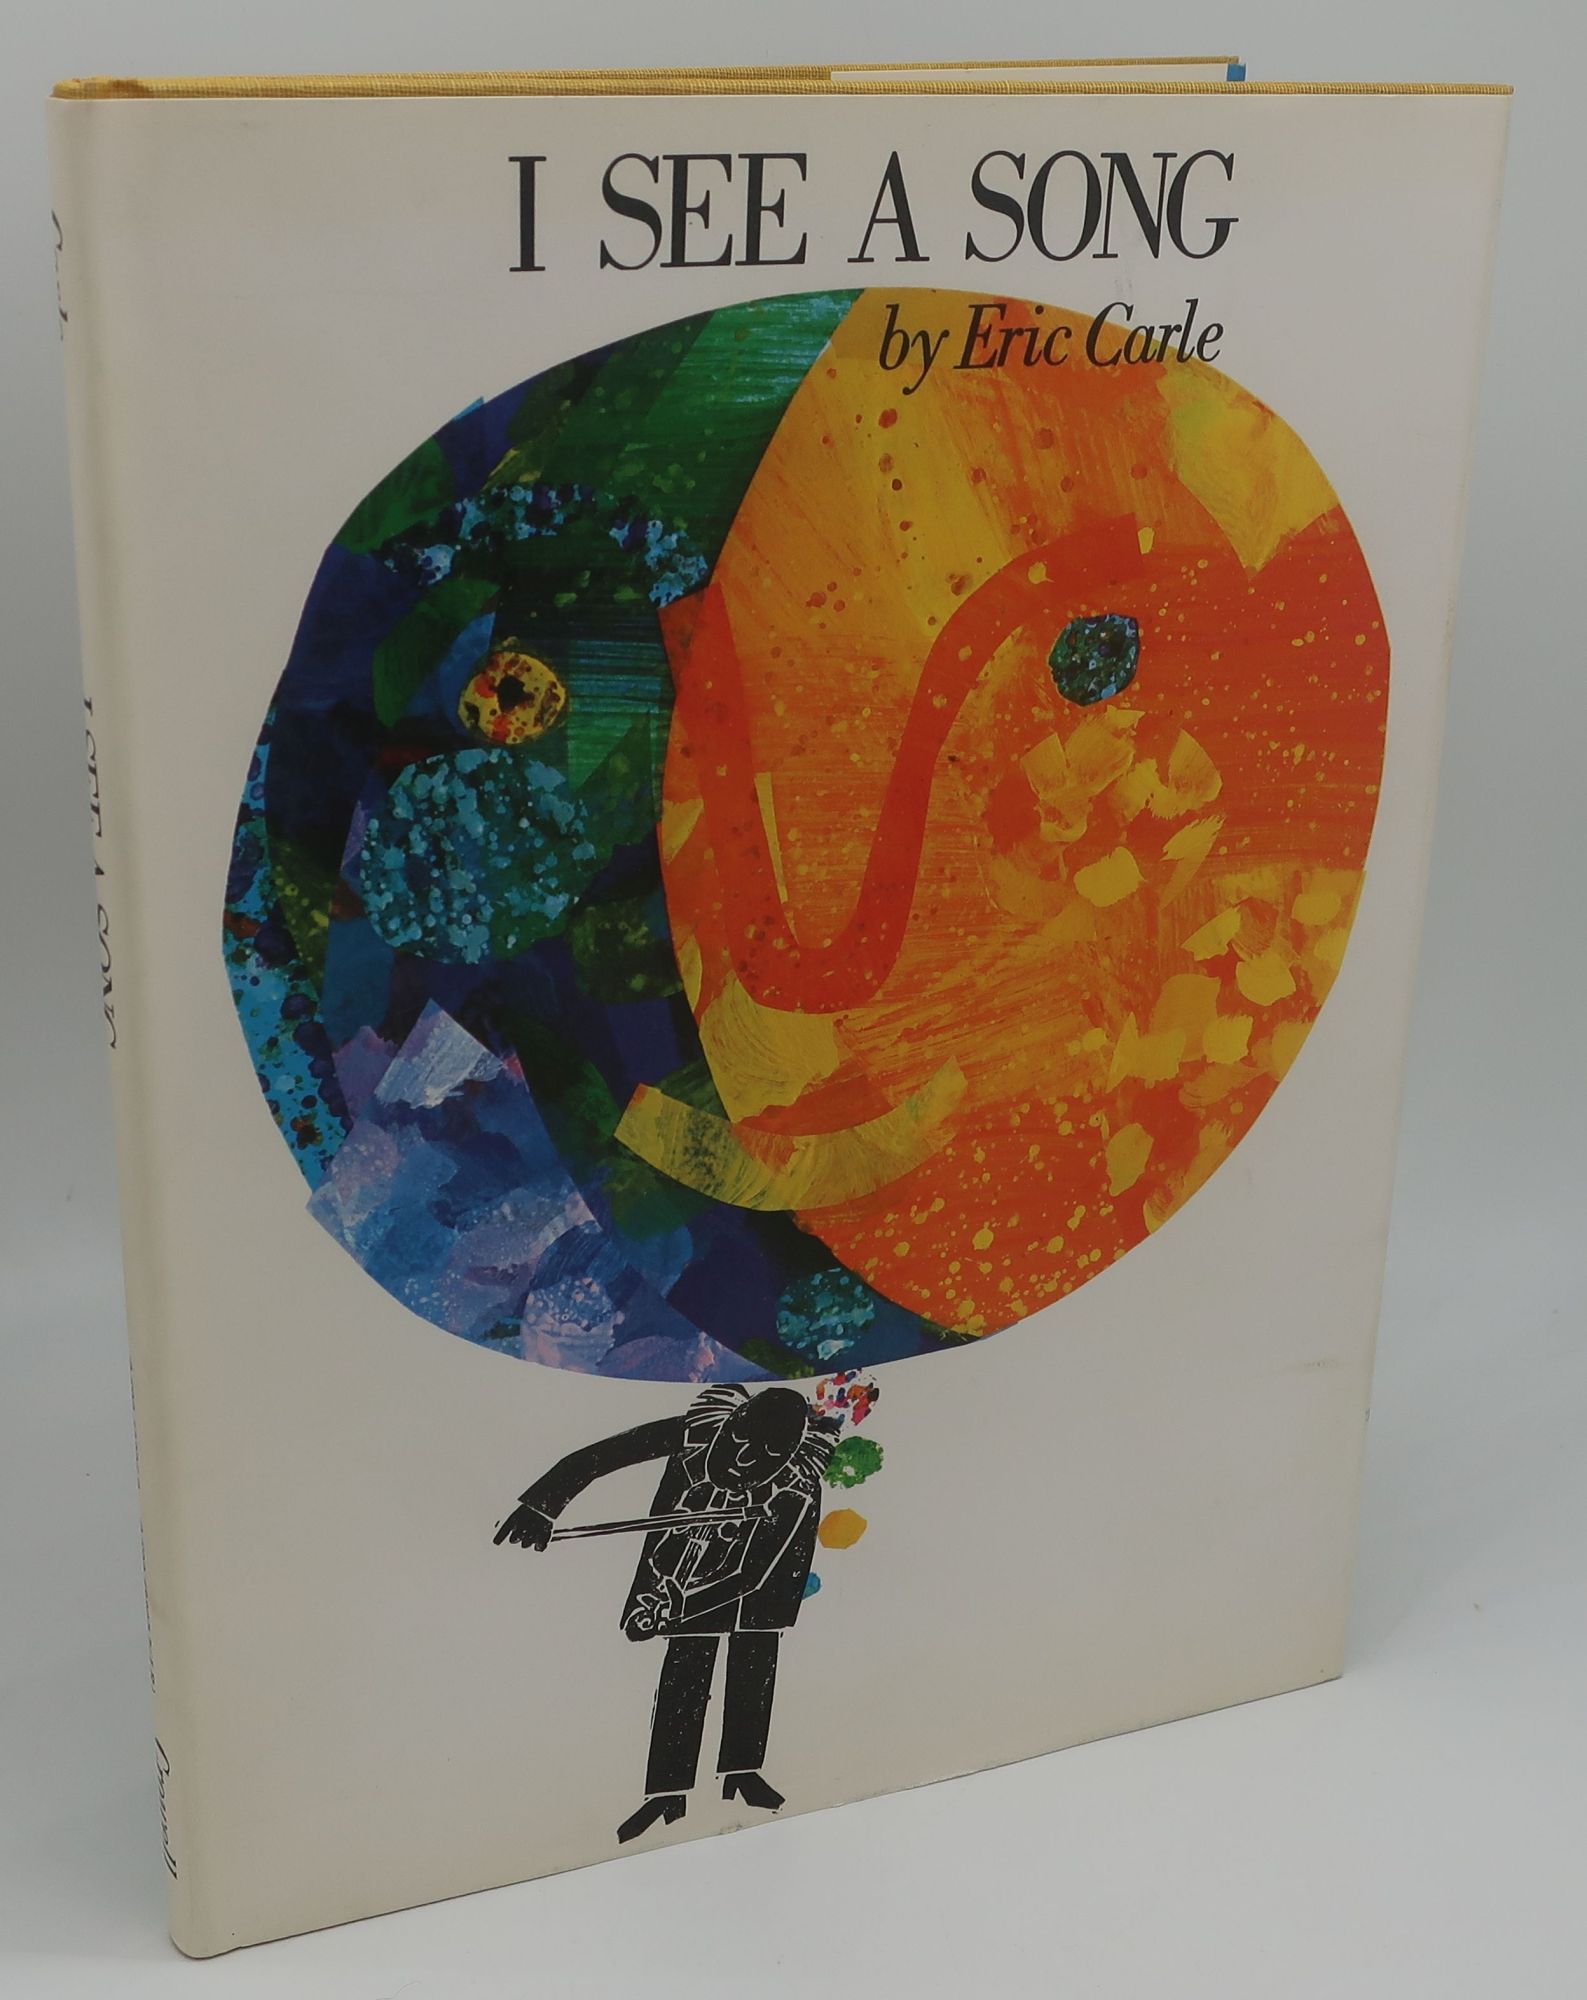 I SEE A SONG [Signed] - ERIC CARLE